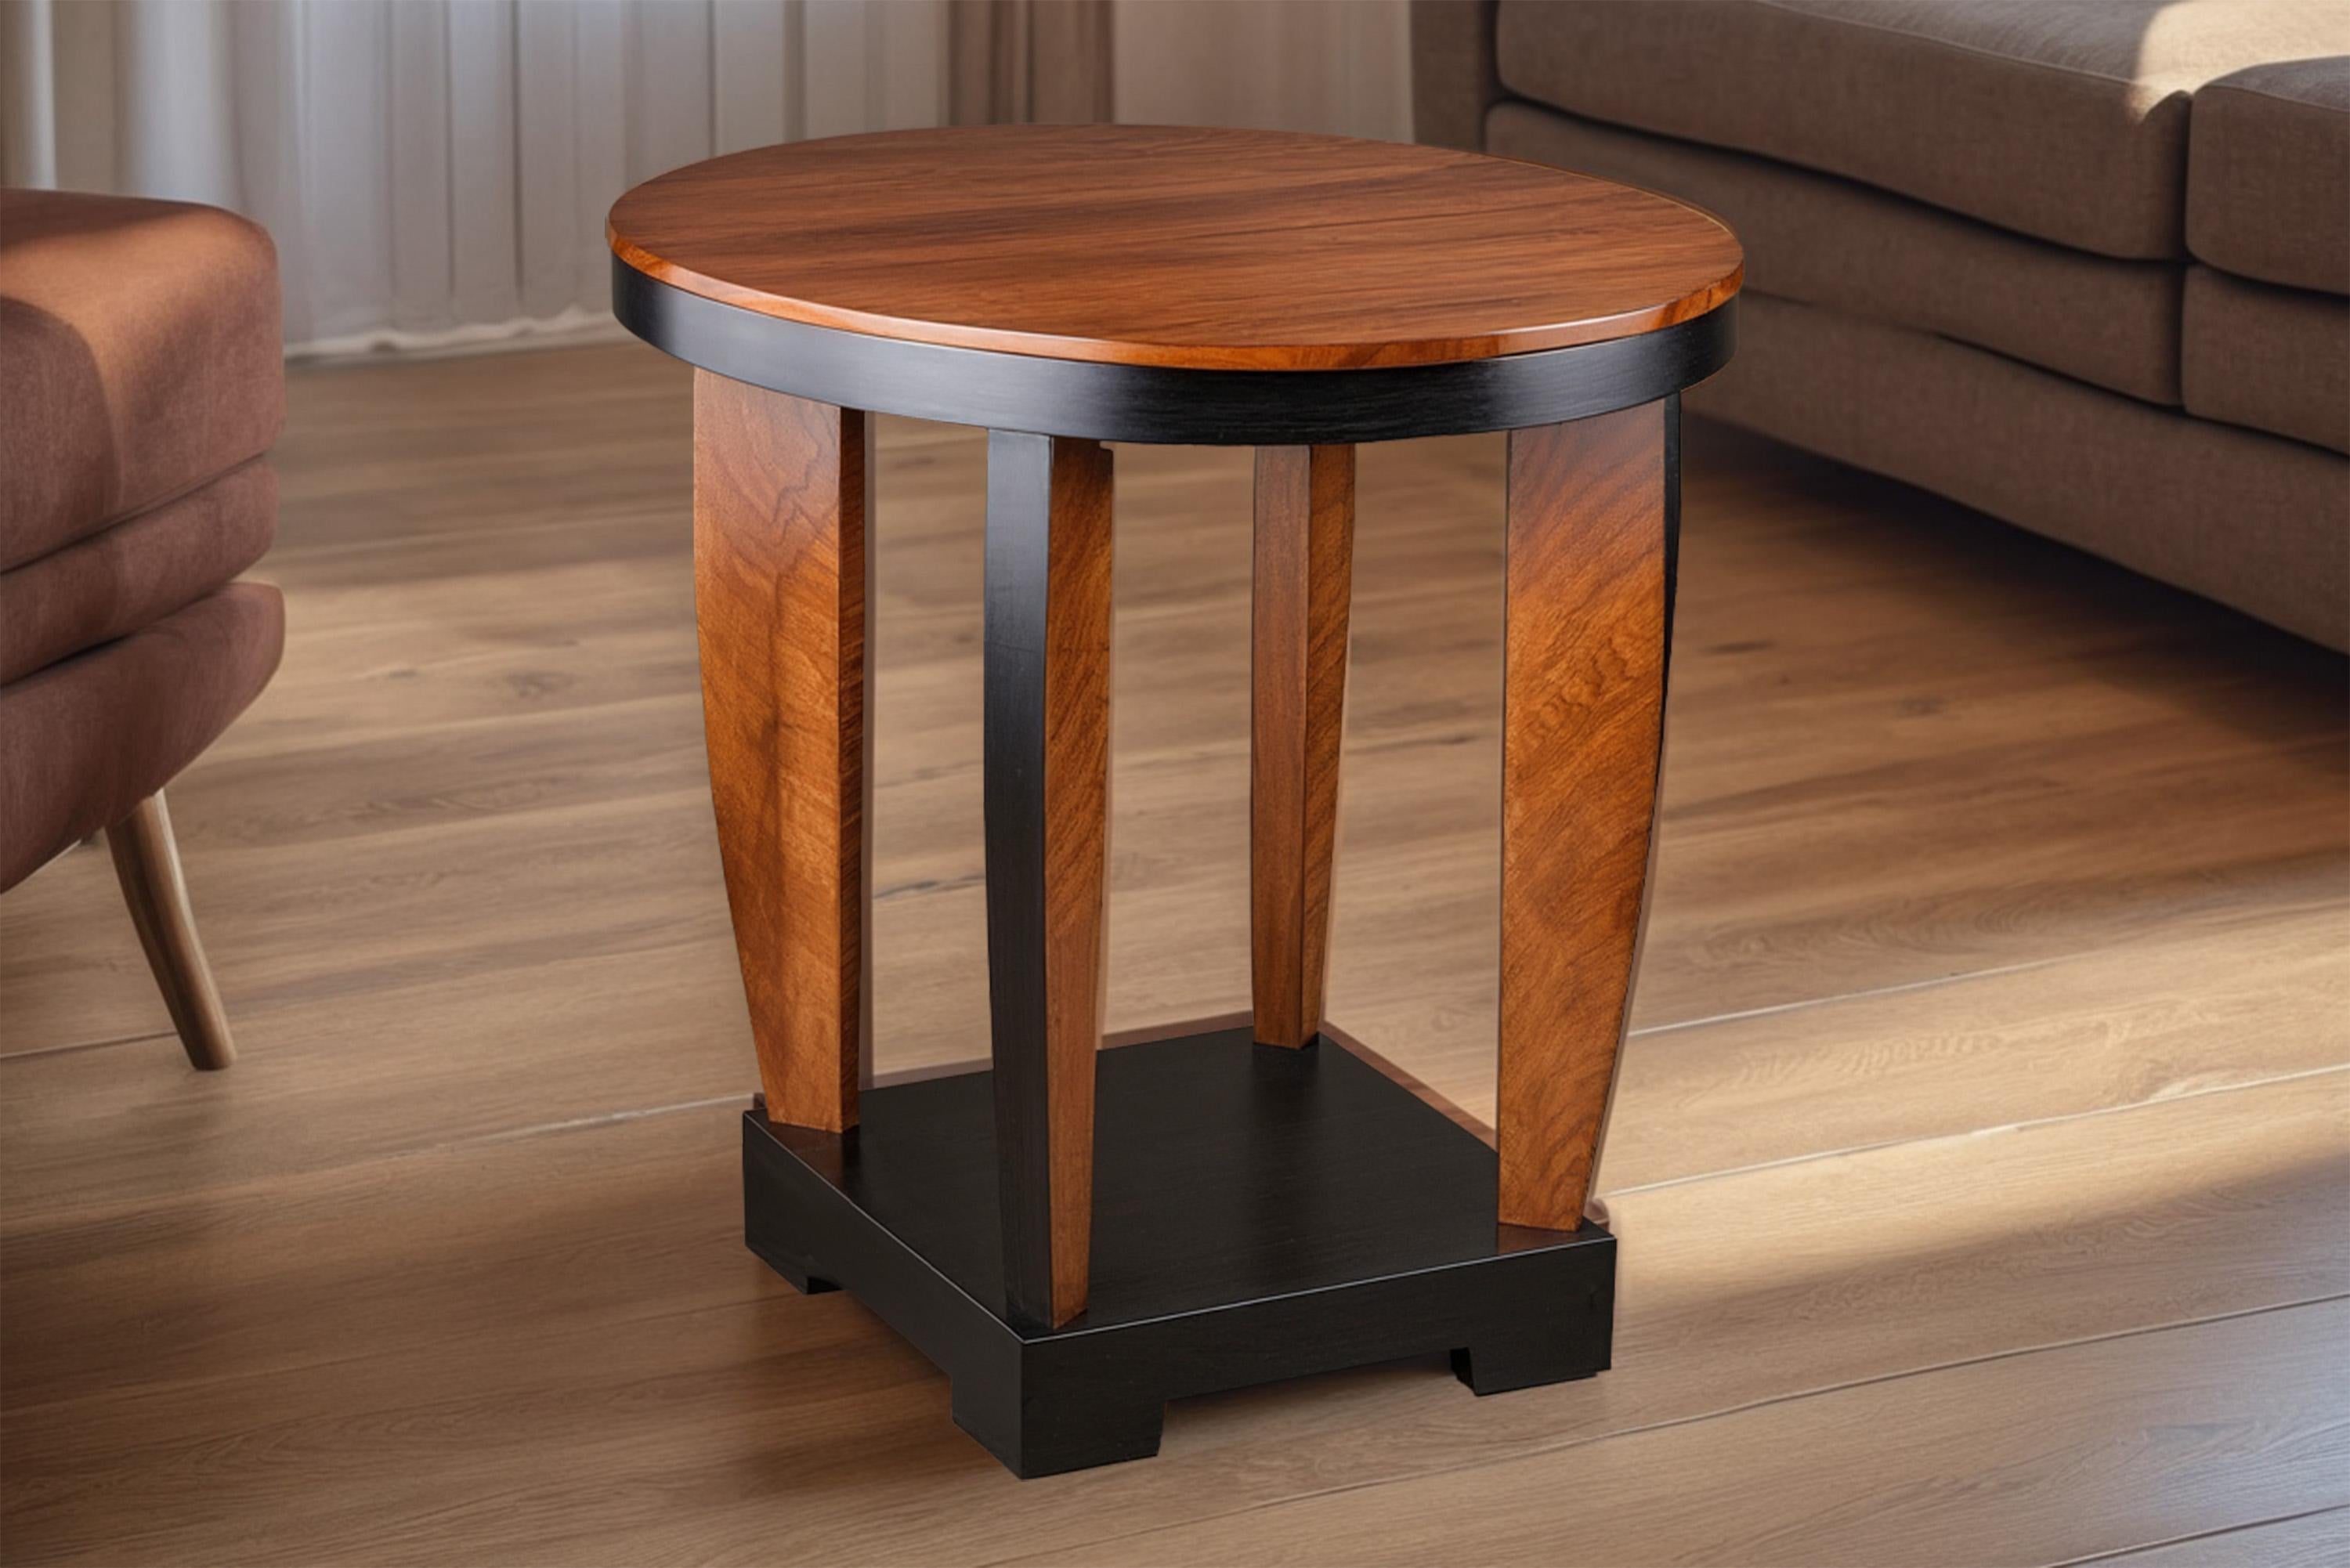 Beautiful round side table in Art Deco style with fine walnut veneer and an expressive veneer image. The curved legs and the angular lower level give the table a nice lightness. Thanks to the color contrast of the veneer and the black lacquer, the